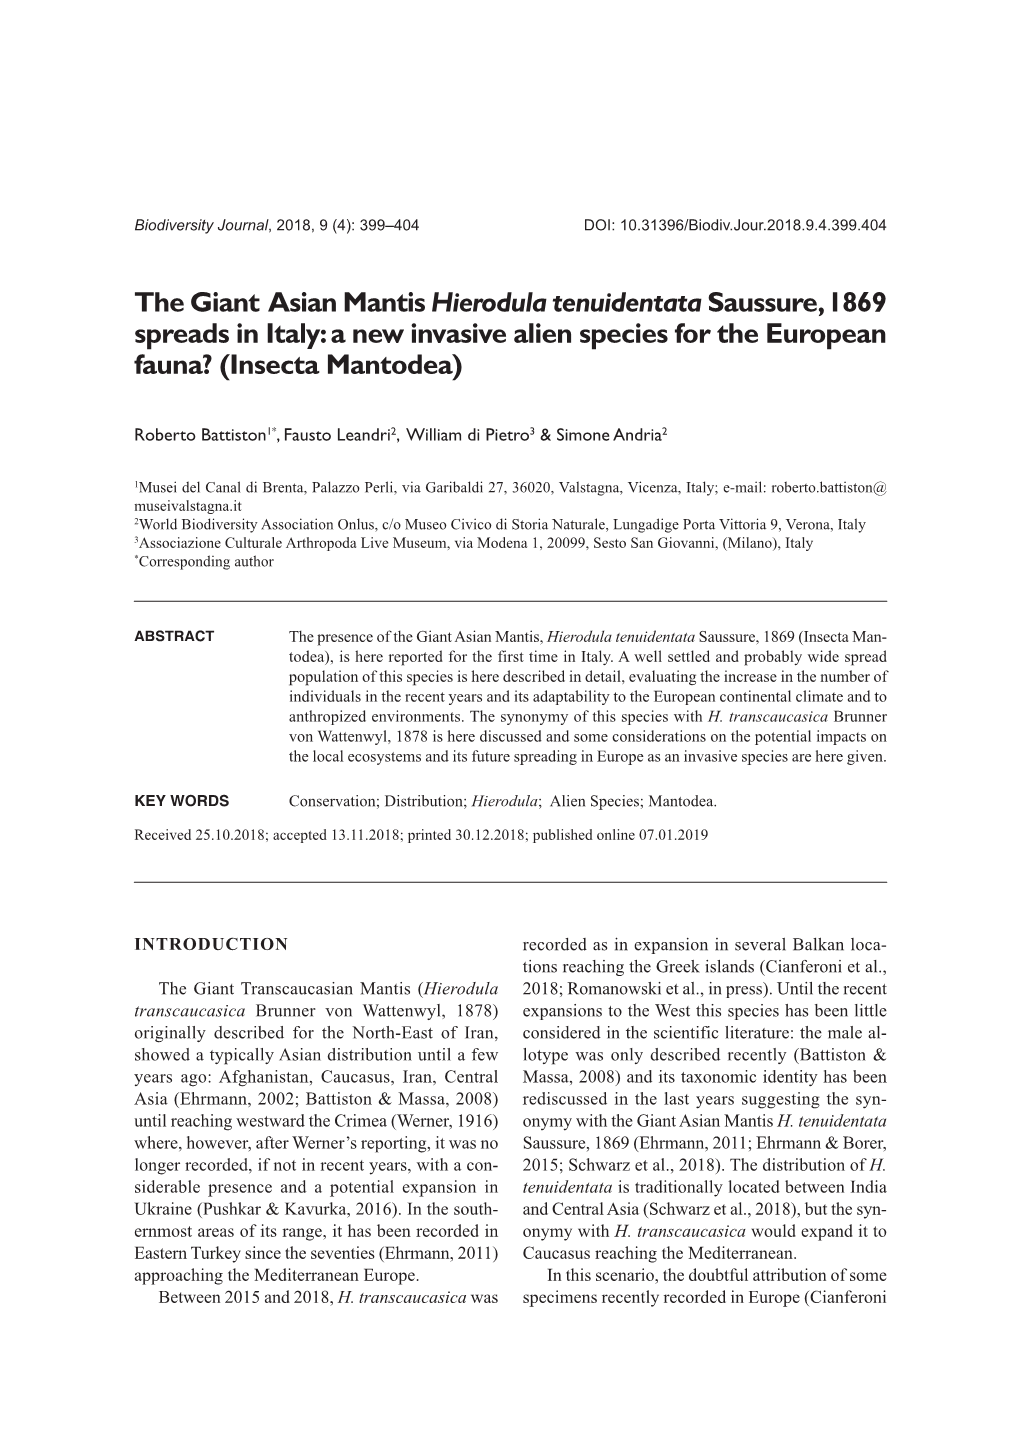 The Giant Asian Mantis Hierodula Tenuidentata Saussure, 1869 Spreads in Italy: a New Invasive Alien Species for the European Fauna? (Insecta Mantodea)